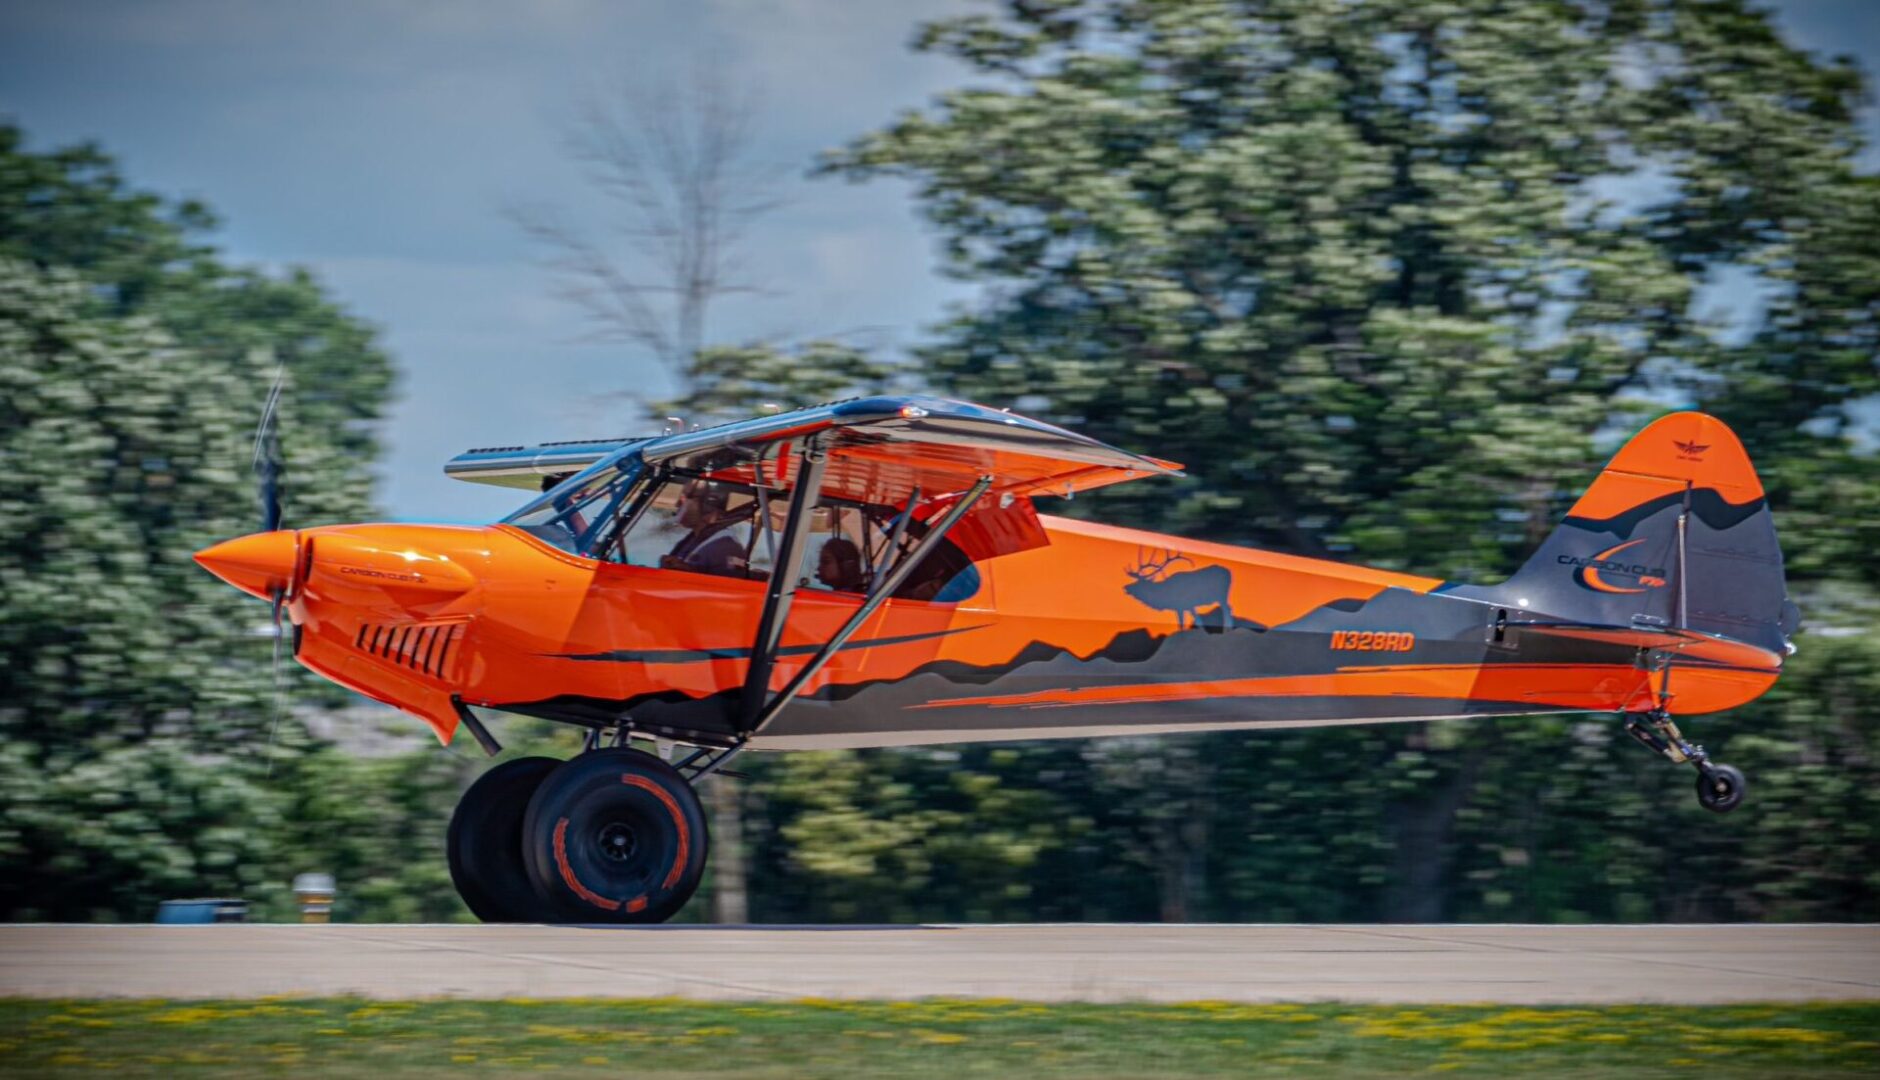 A small orange airplane is flying on the road.